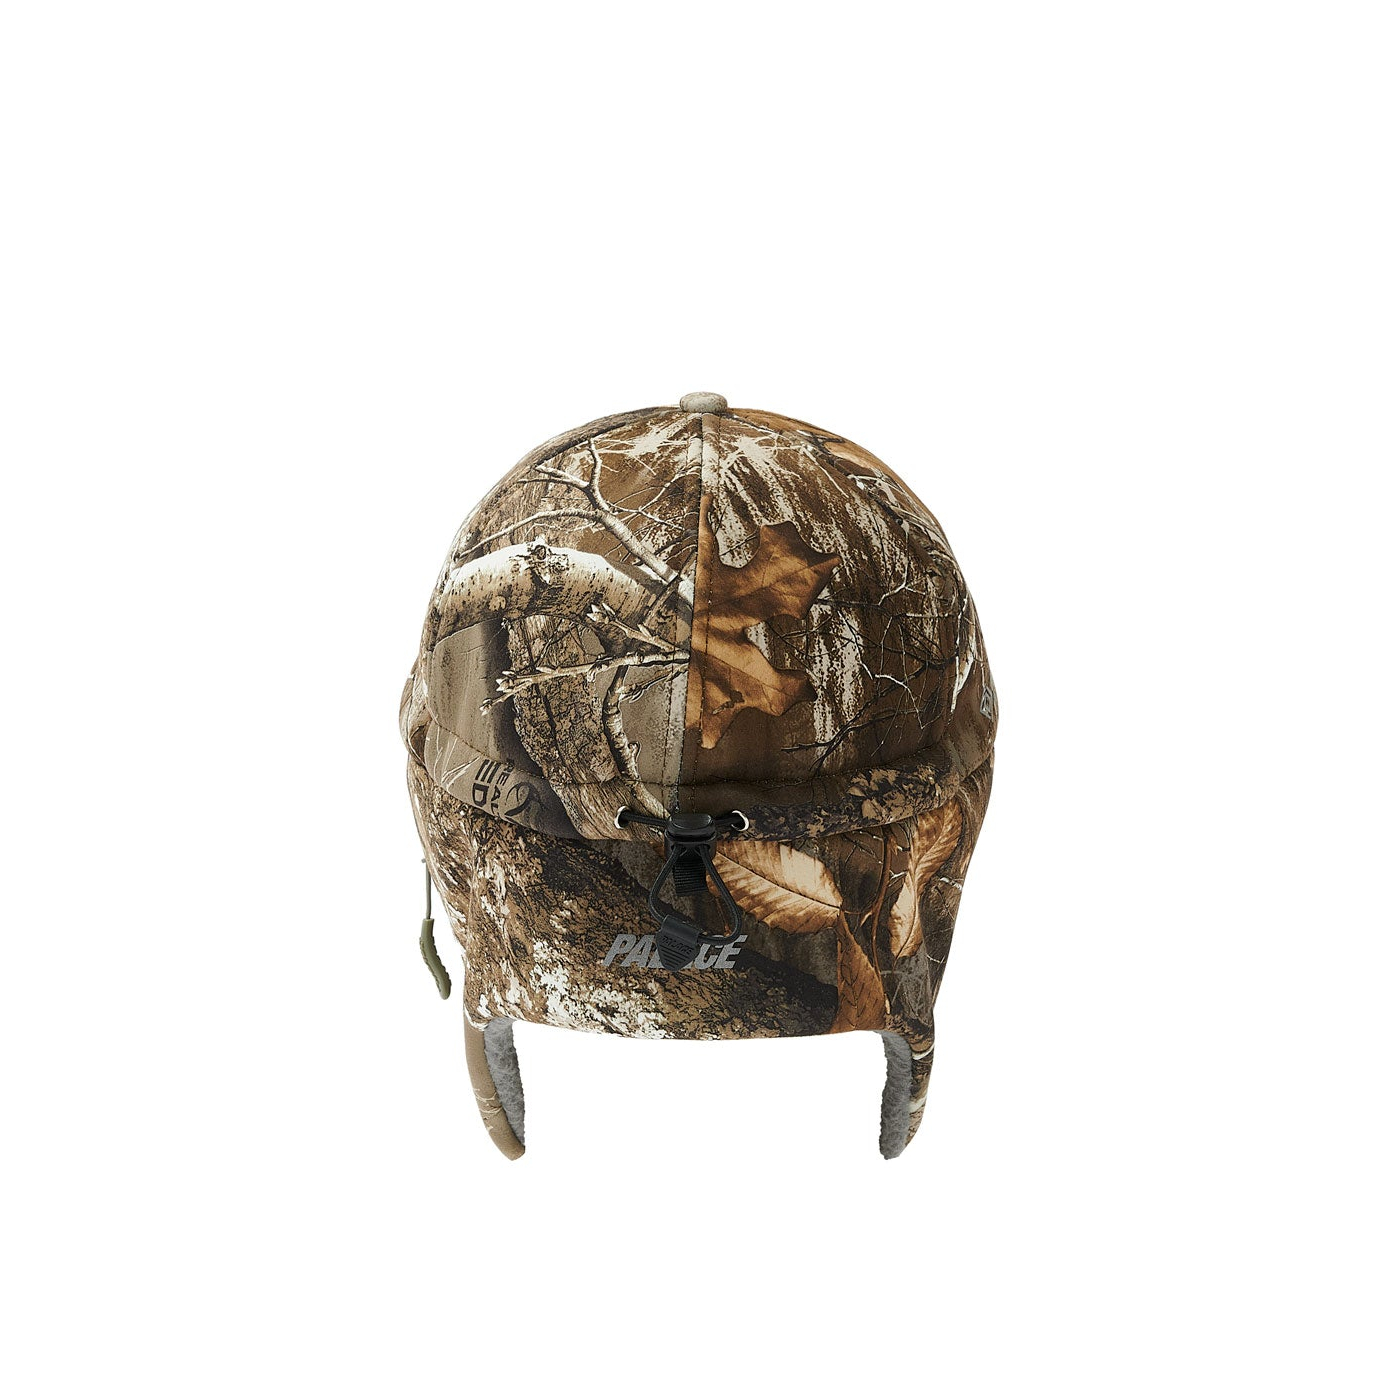 Thumbnail GORE-TEX INFINIUM DOG EAR 6-PANEL REAL TREE one color